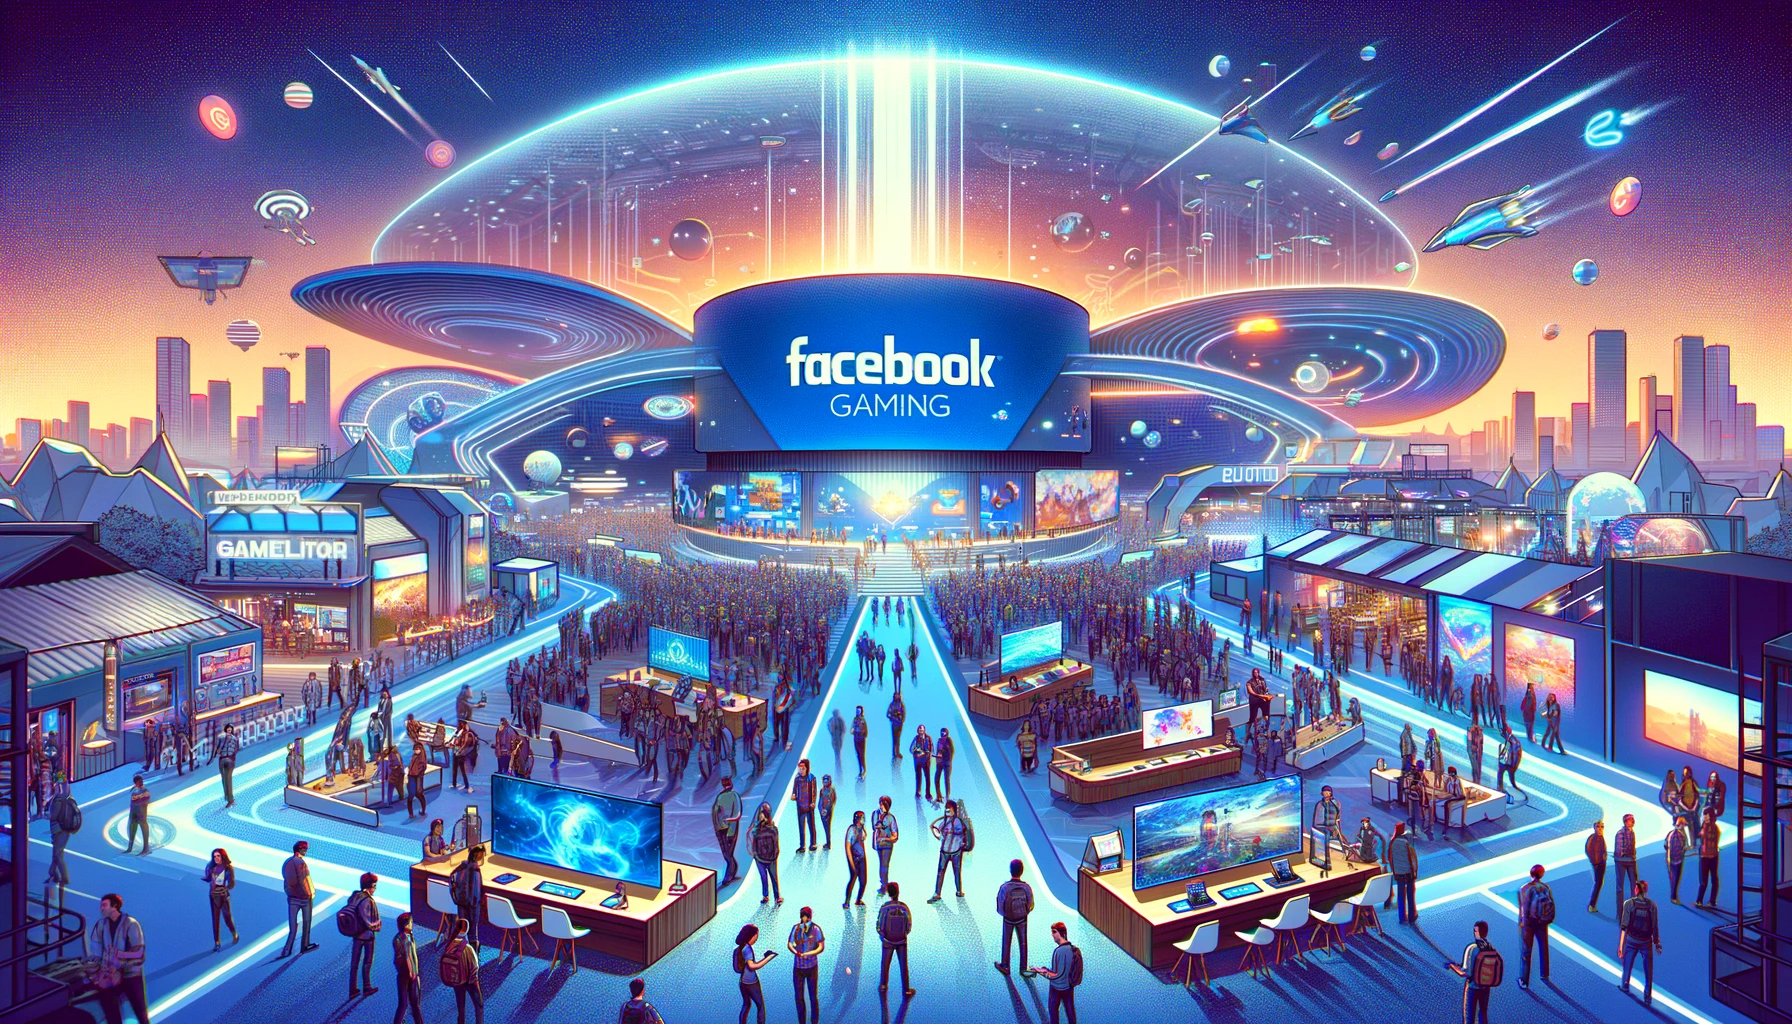 The Future of Gaming with Facebook Gaming at GDC